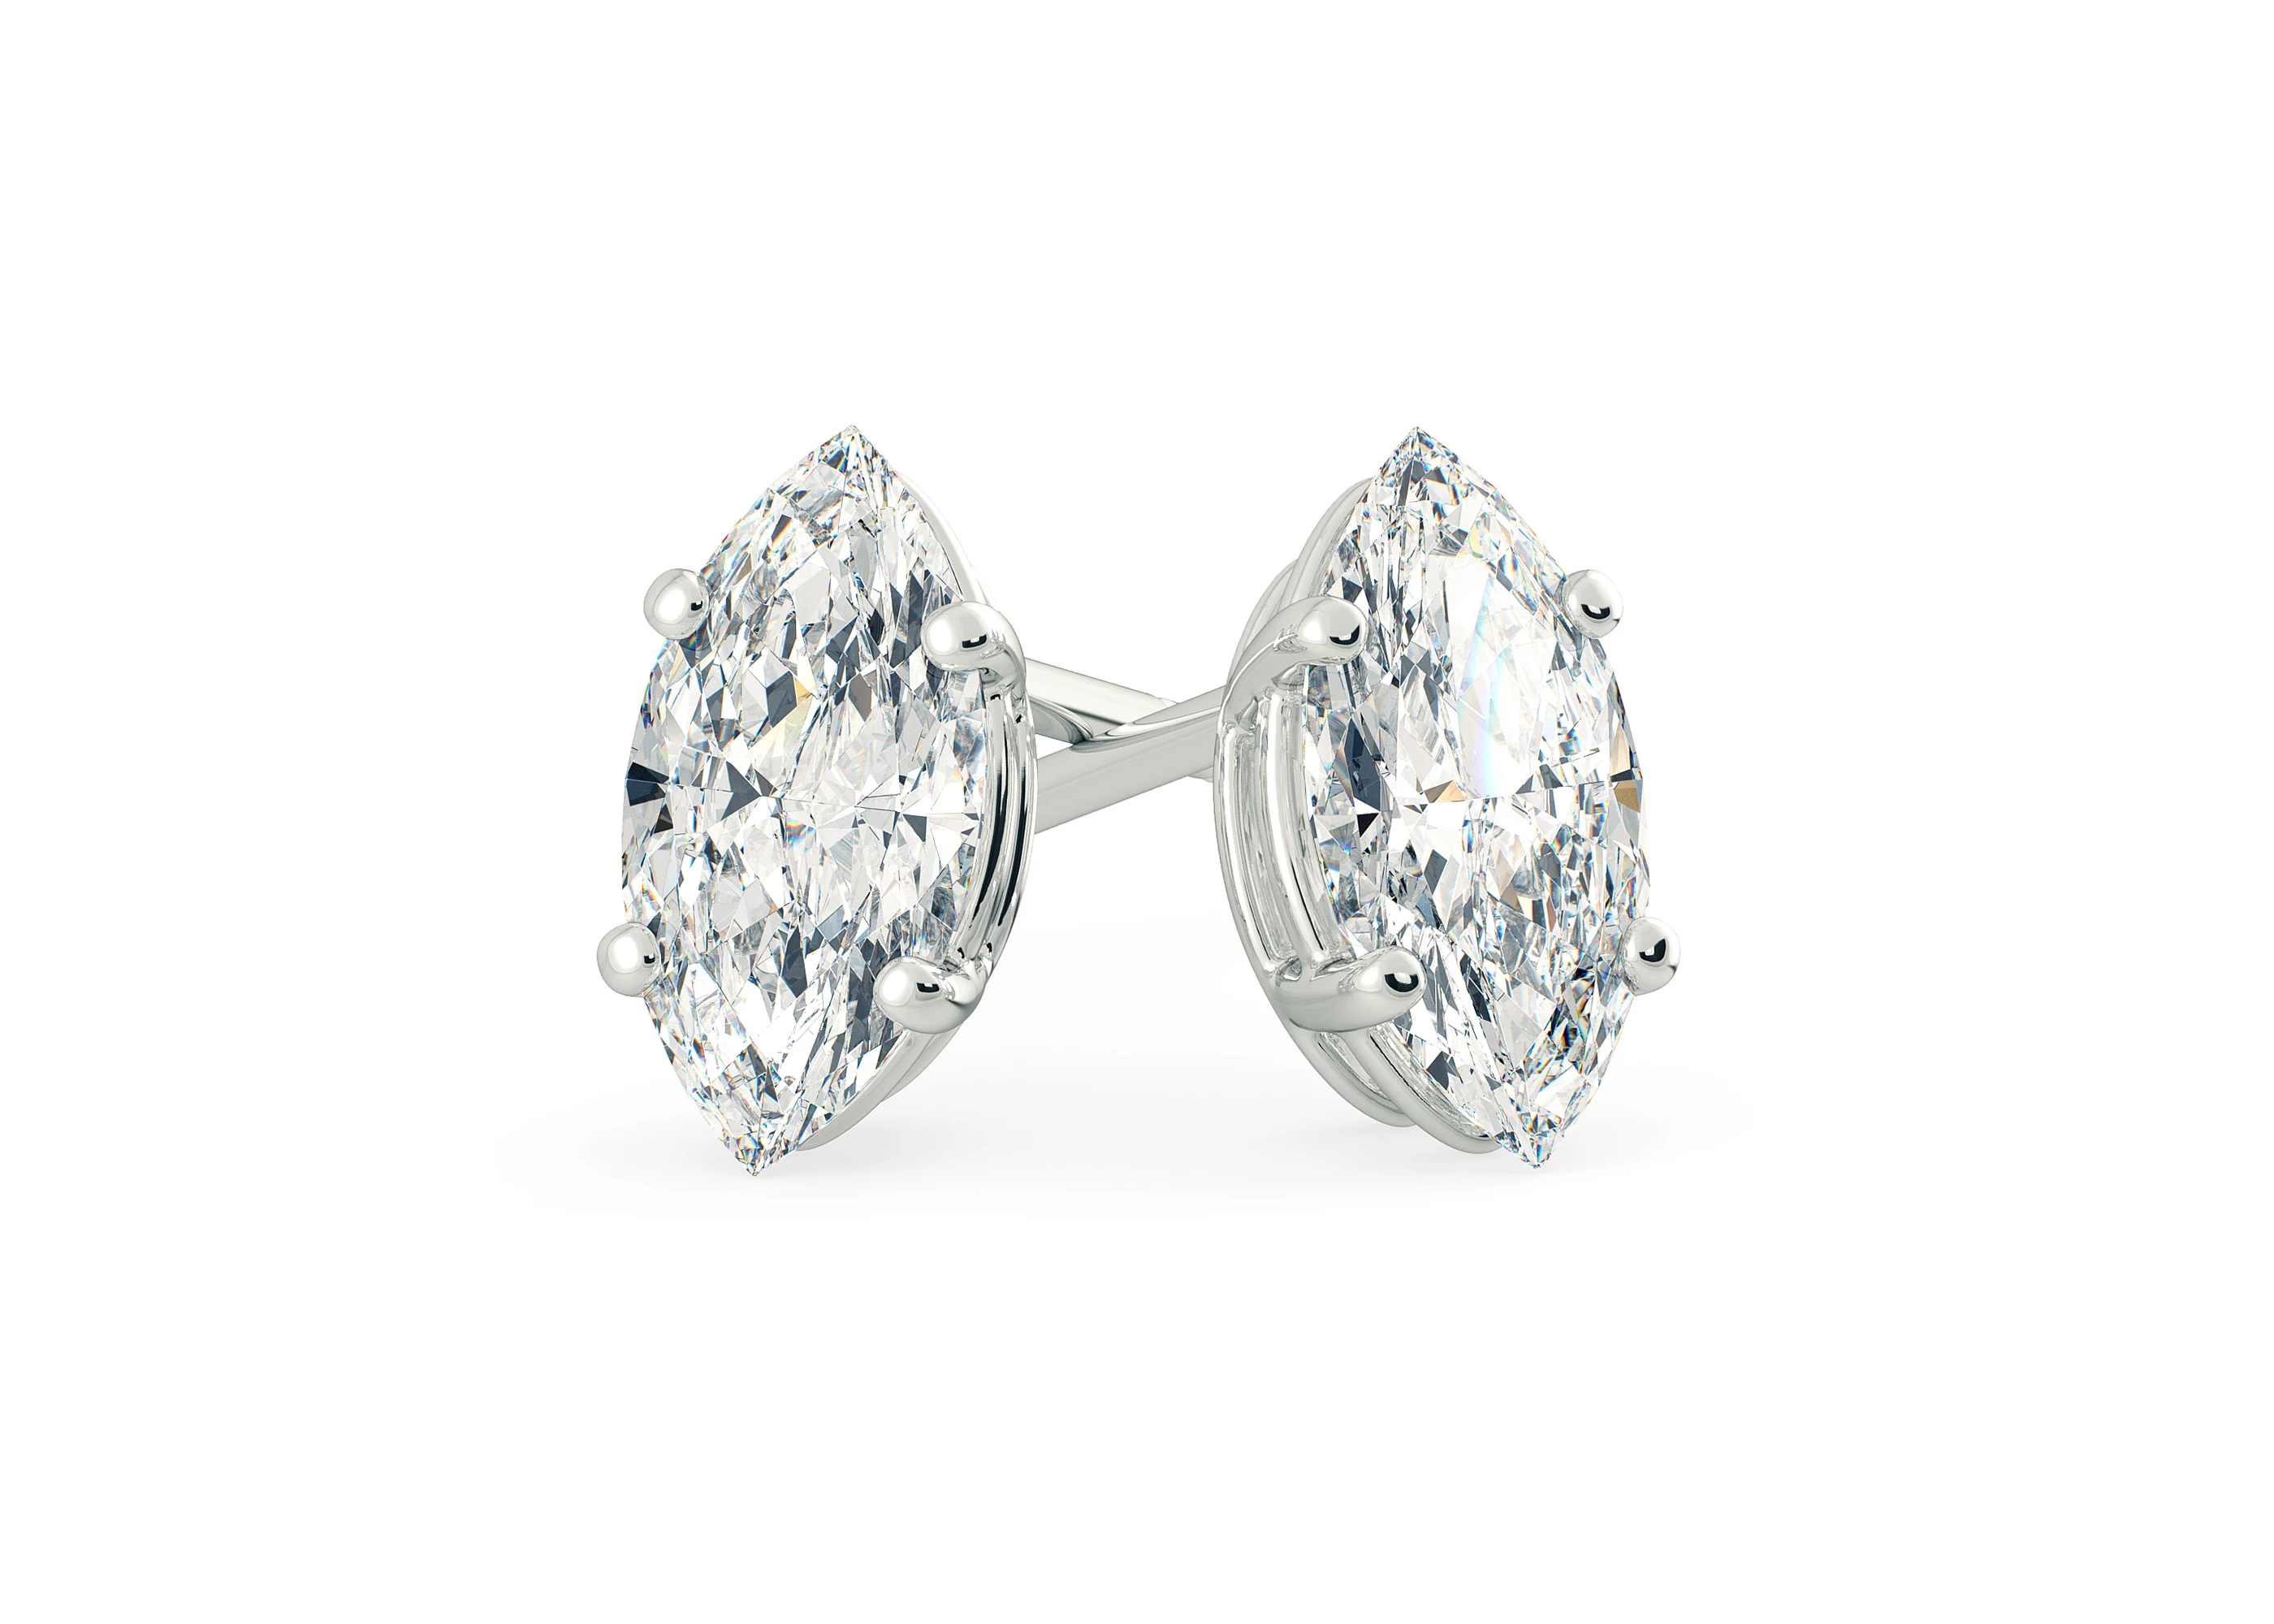 Ettore Marquise Diamond Stud Earrings in Platinum with Alpha Backs